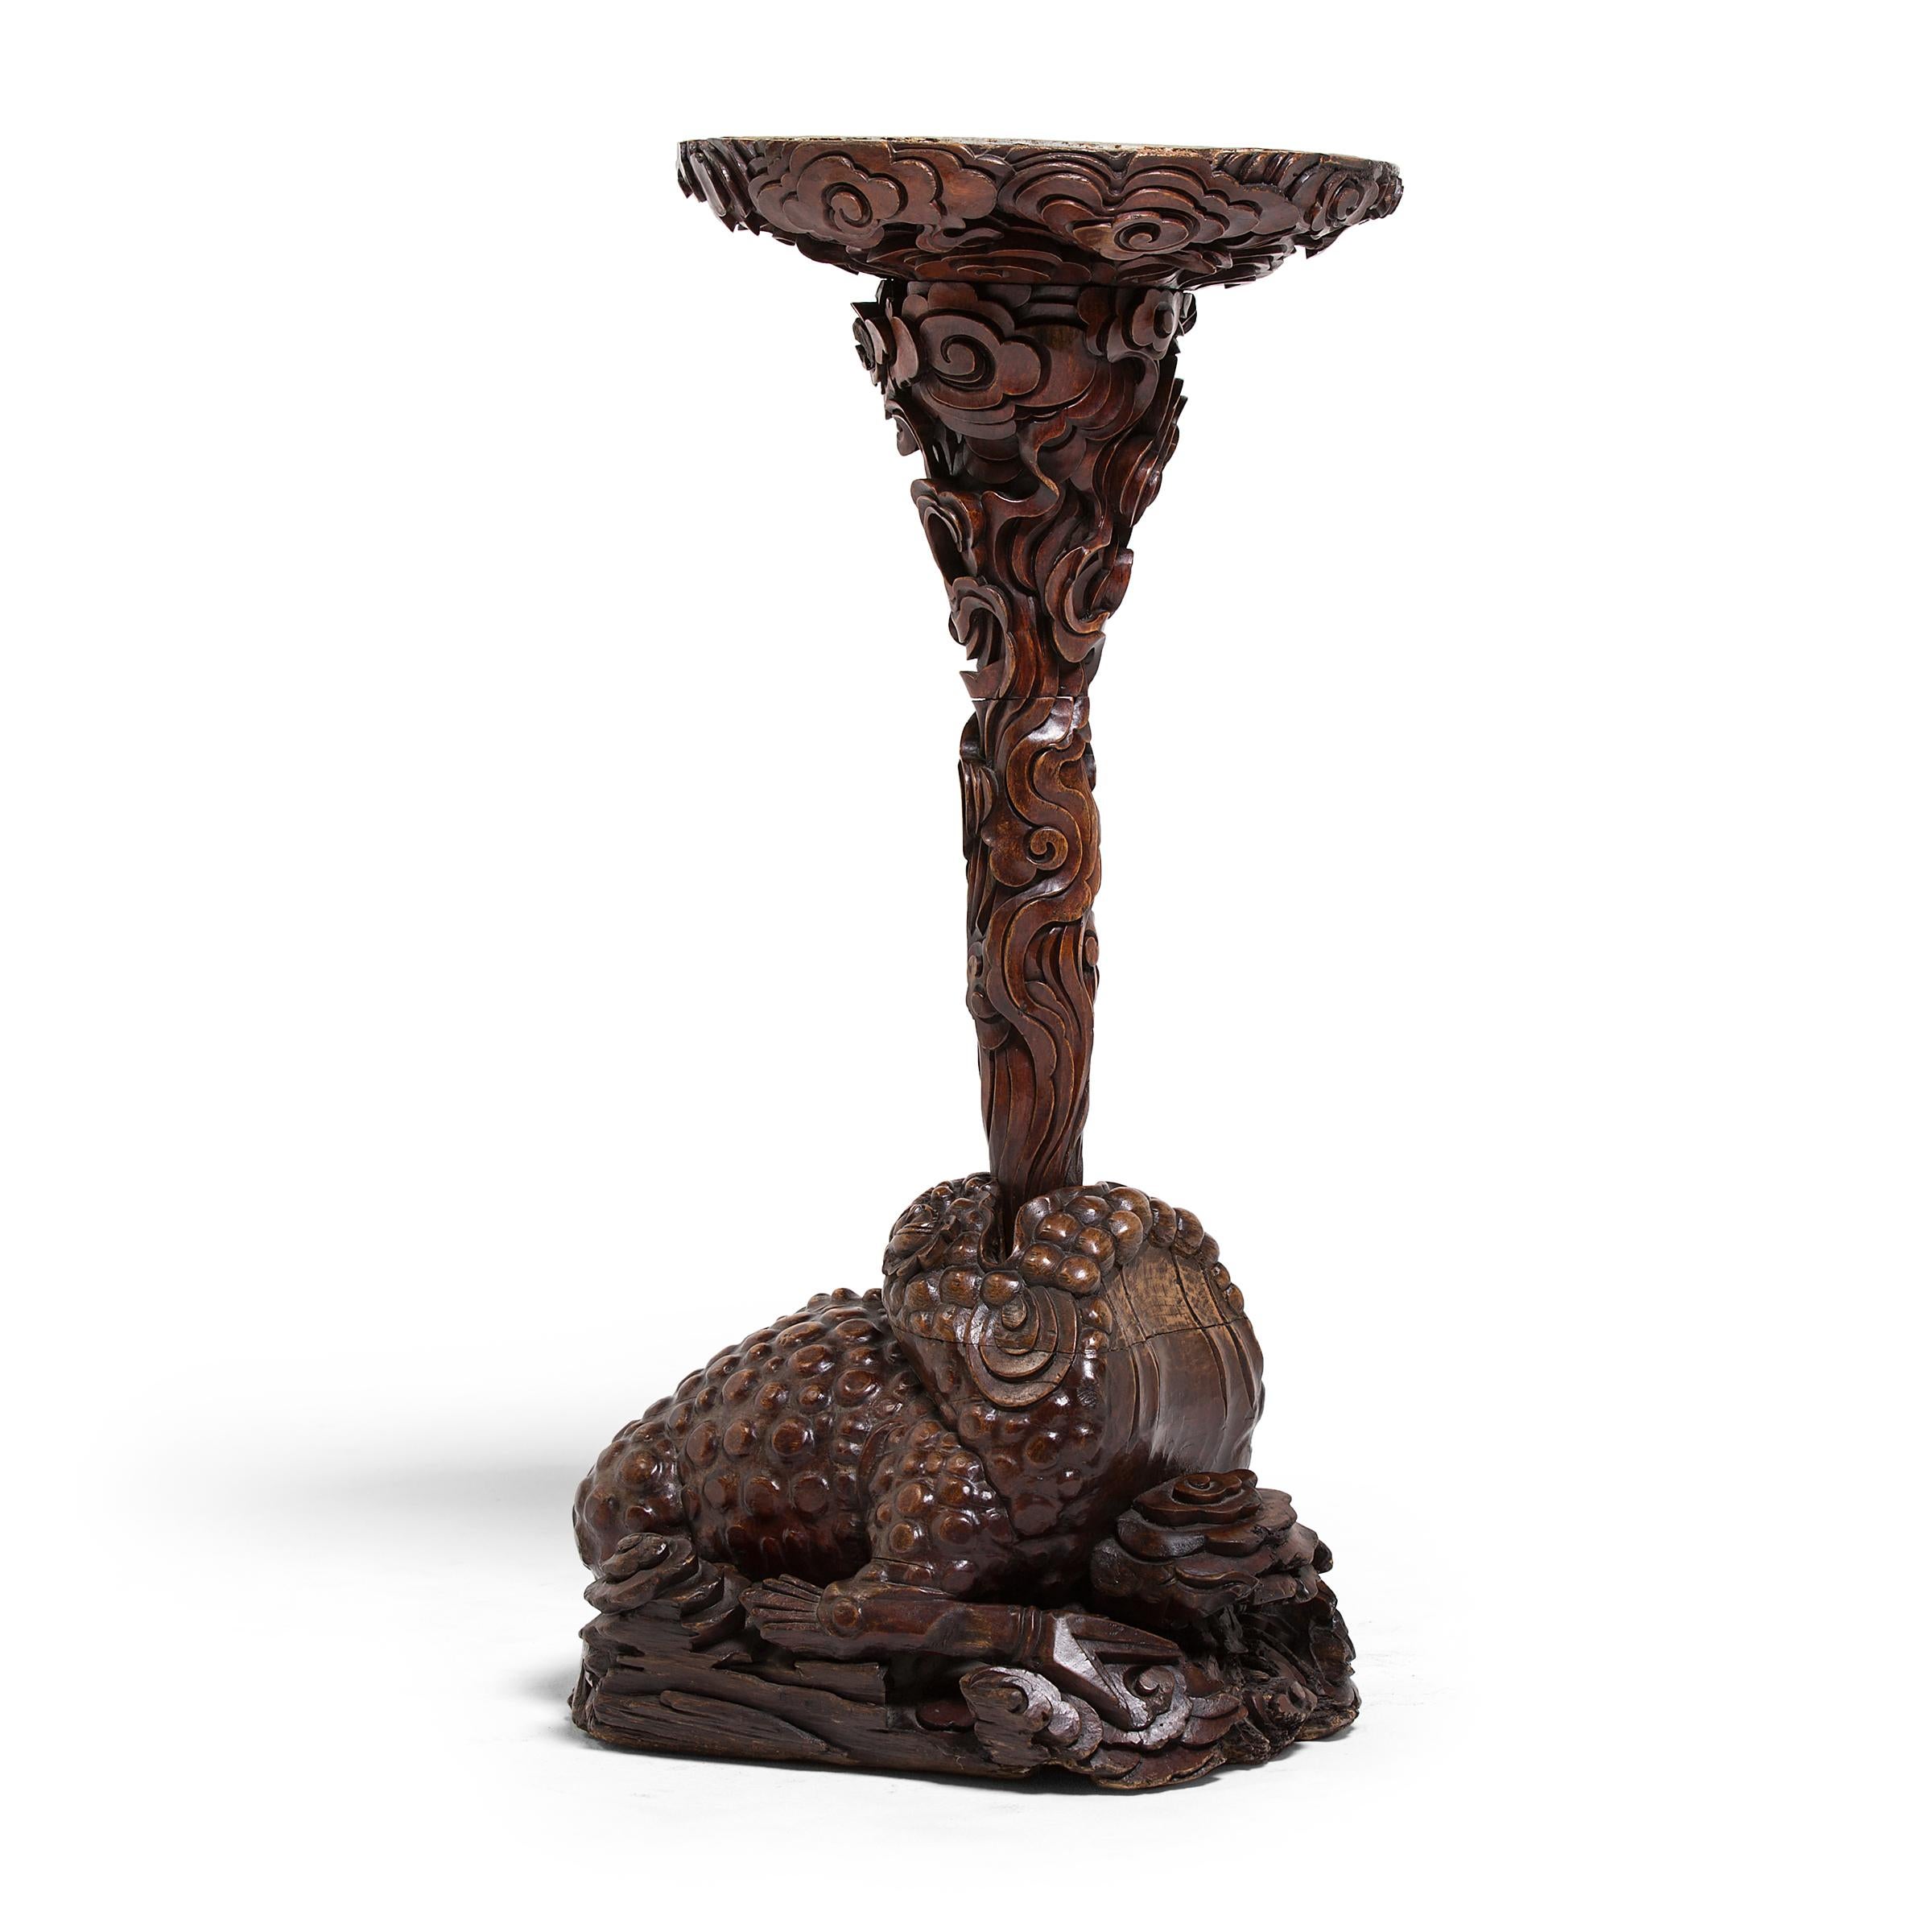 This 19th century incense stand is intricately carved in the form of a mythical three-legged toad, a potent symbol of luck and prosperity. Known as the Jin Chan, or Money Toad, this mythical amphibian is the animal companion of Daoist immortal Liu